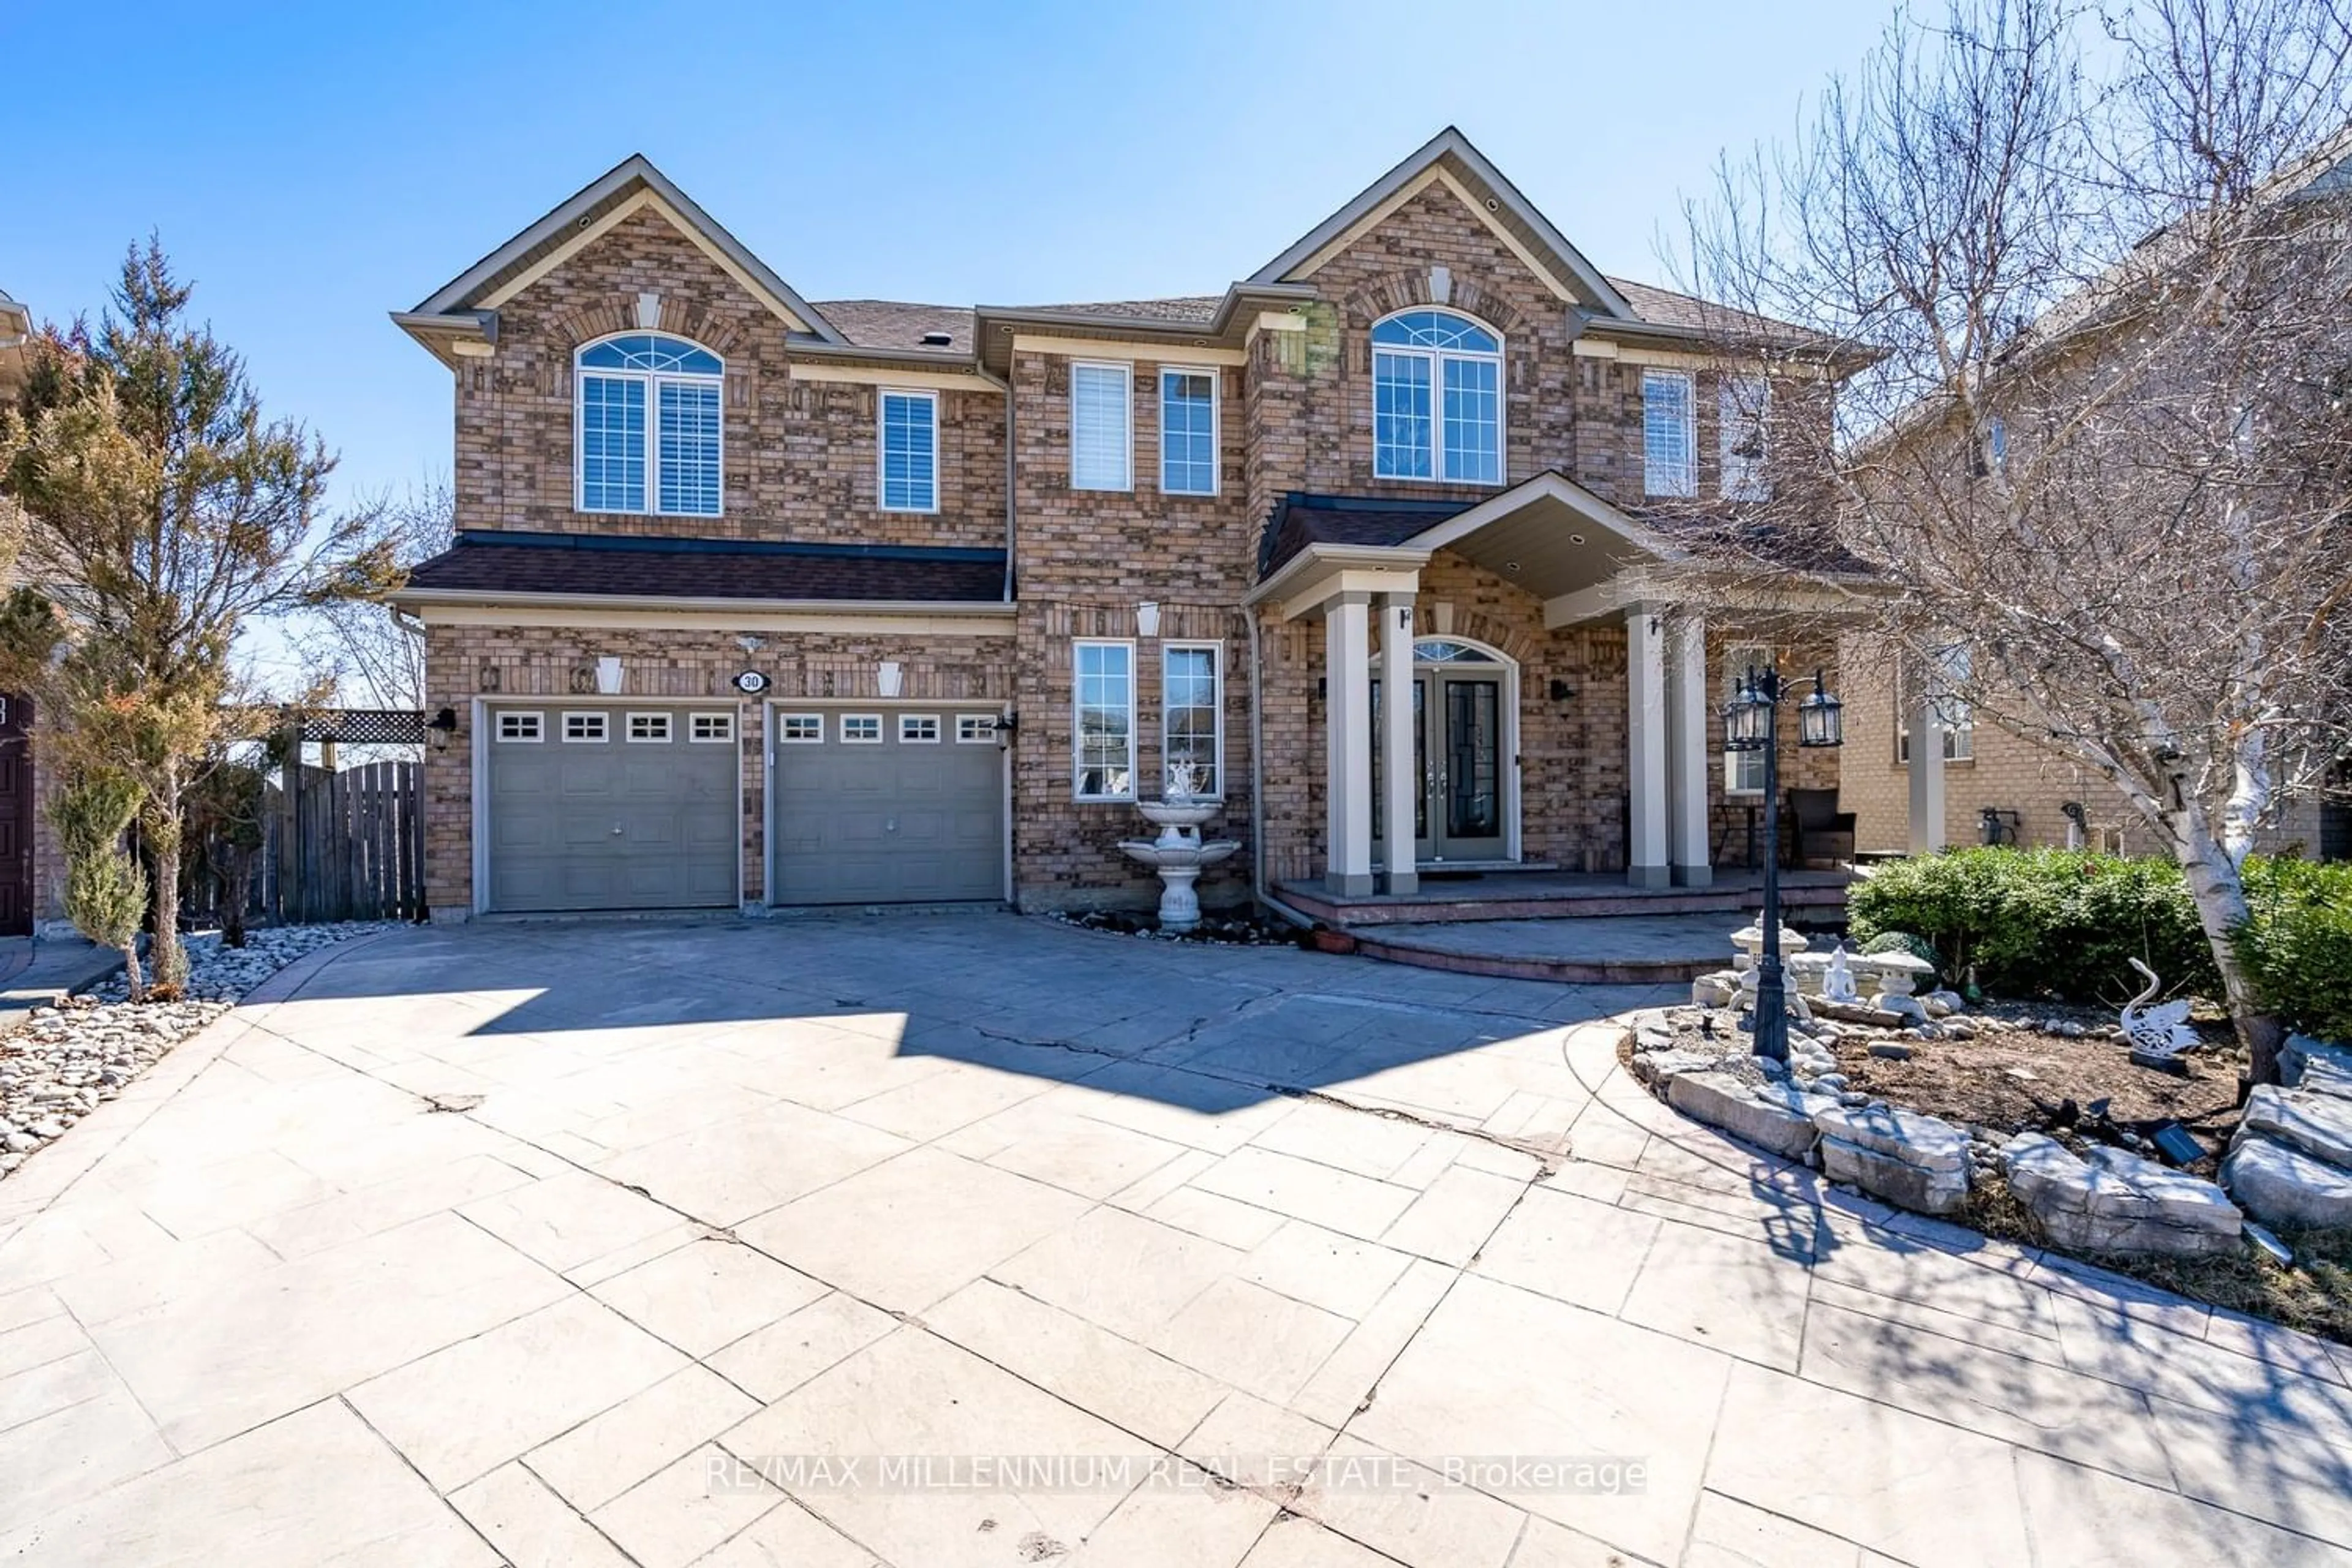 Home with brick exterior material for 30 Maltby Crt, Brampton Ontario L6P 1A5